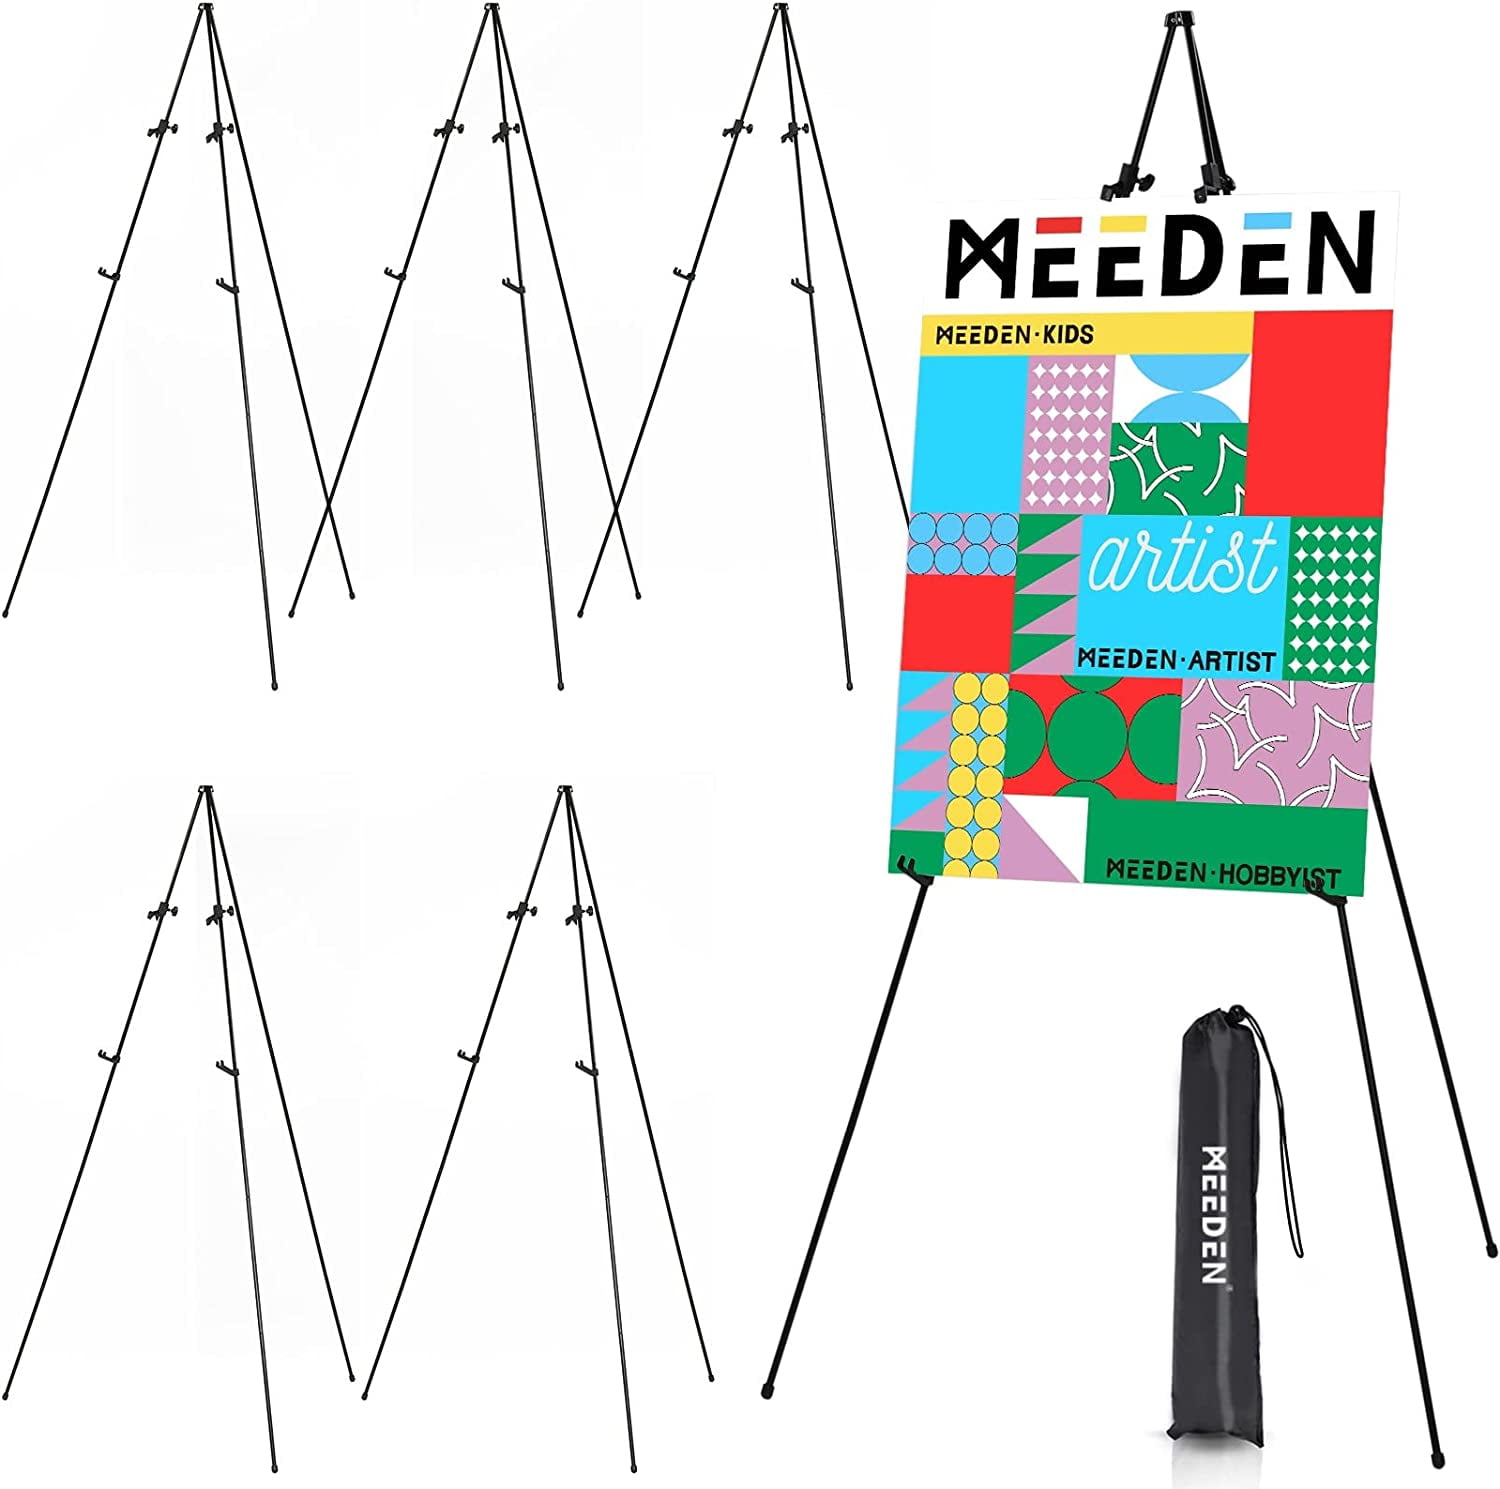 MEEDEN Easel Stand for Display, 63 Tripod Collapsible Artist Floor Easel,  Easy Folding Portable Metal Easel Stand for Signs, Posters, Display Show,  Black, 6 Pack 